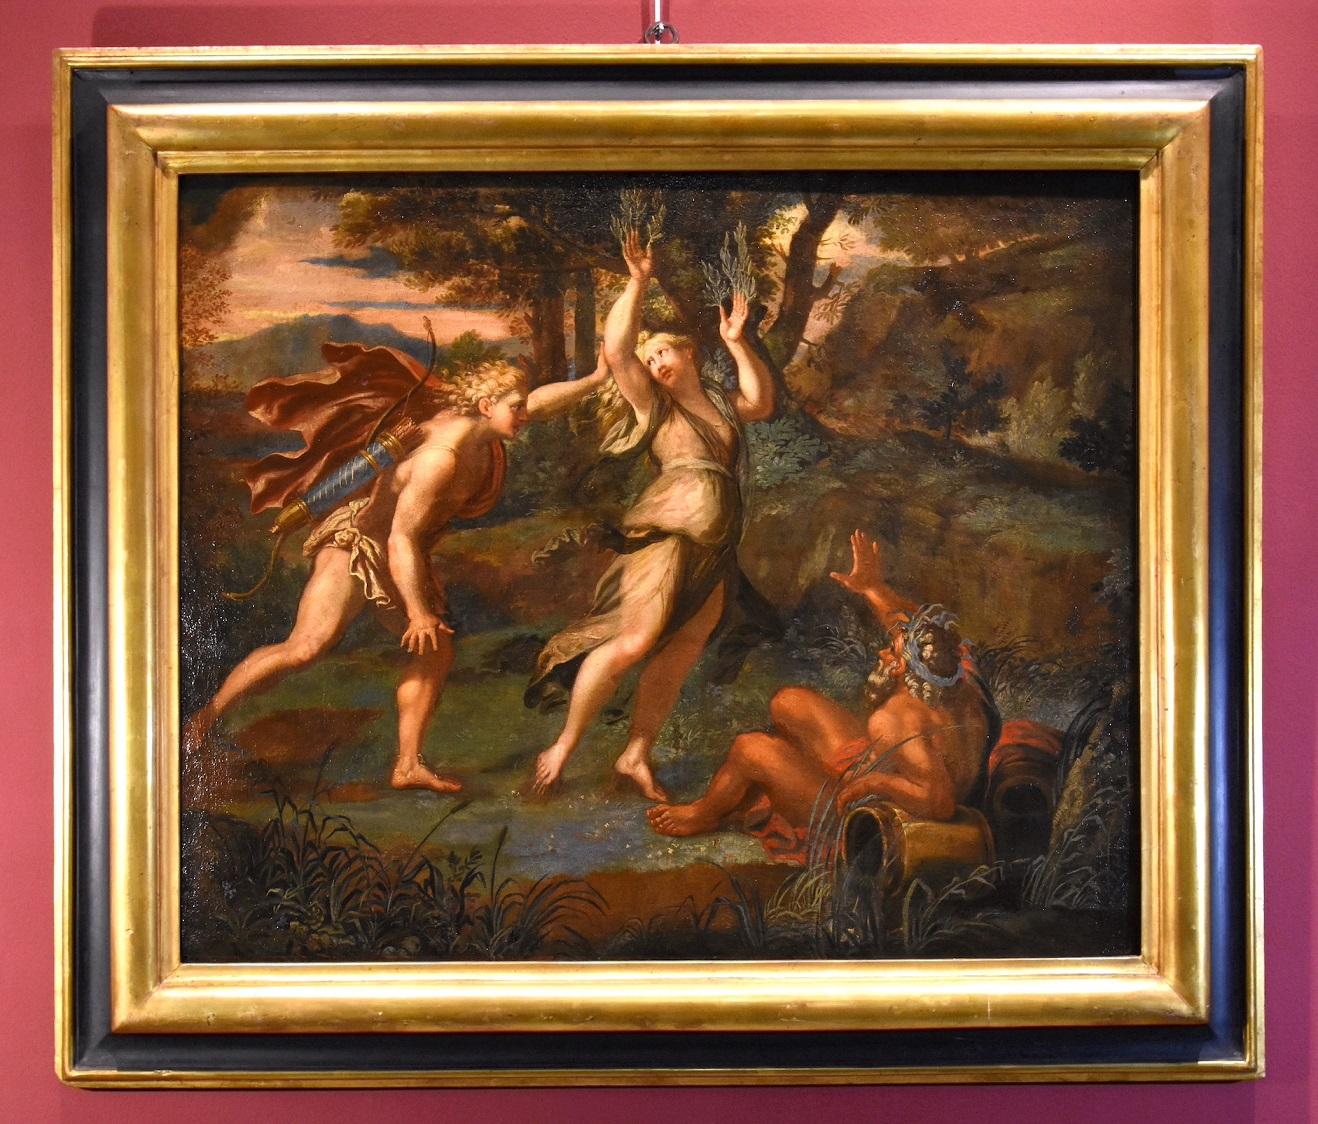 Giovanni Angelo Canini (Rome, 1608 - Rome, 1666) Landscape Painting - Myth Apollo Daphne Canini Paint Oil on canvas Old master 17th Century Italy